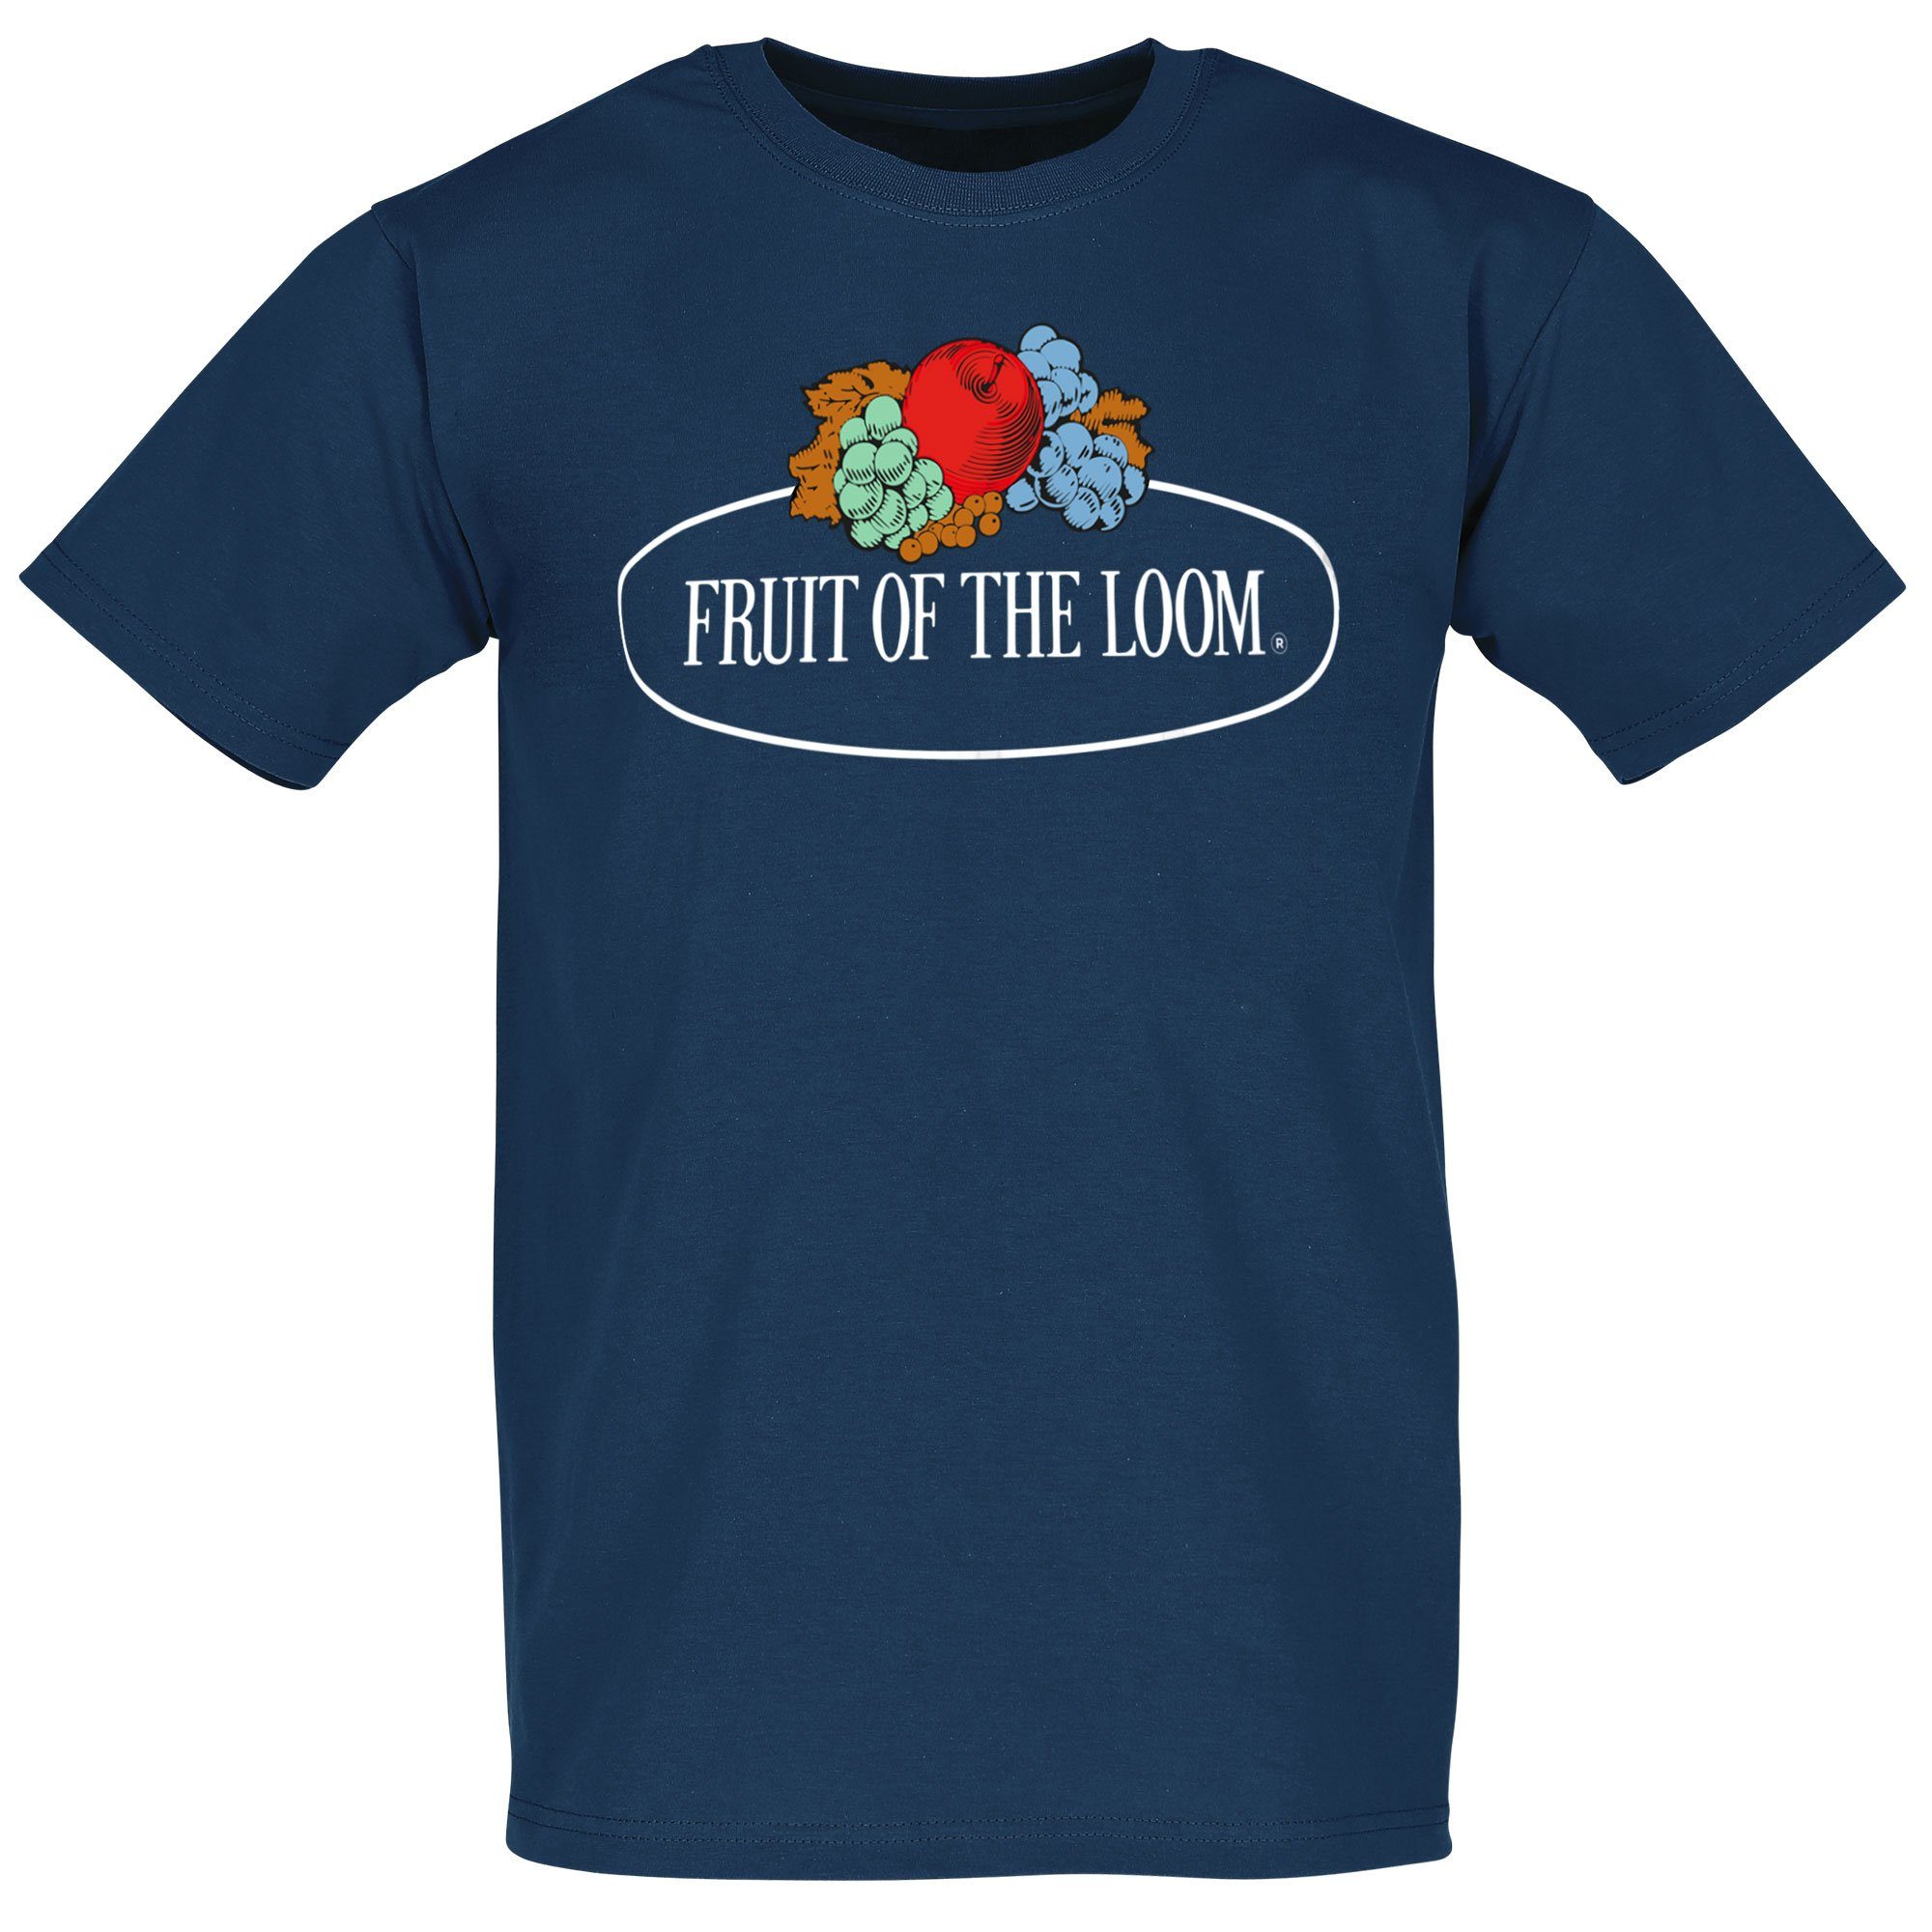 Rundhalsshirt of mit Loom of Loom the the Fruit Vintage Fruit Fruit T-Shirt the Loom navy of Logo